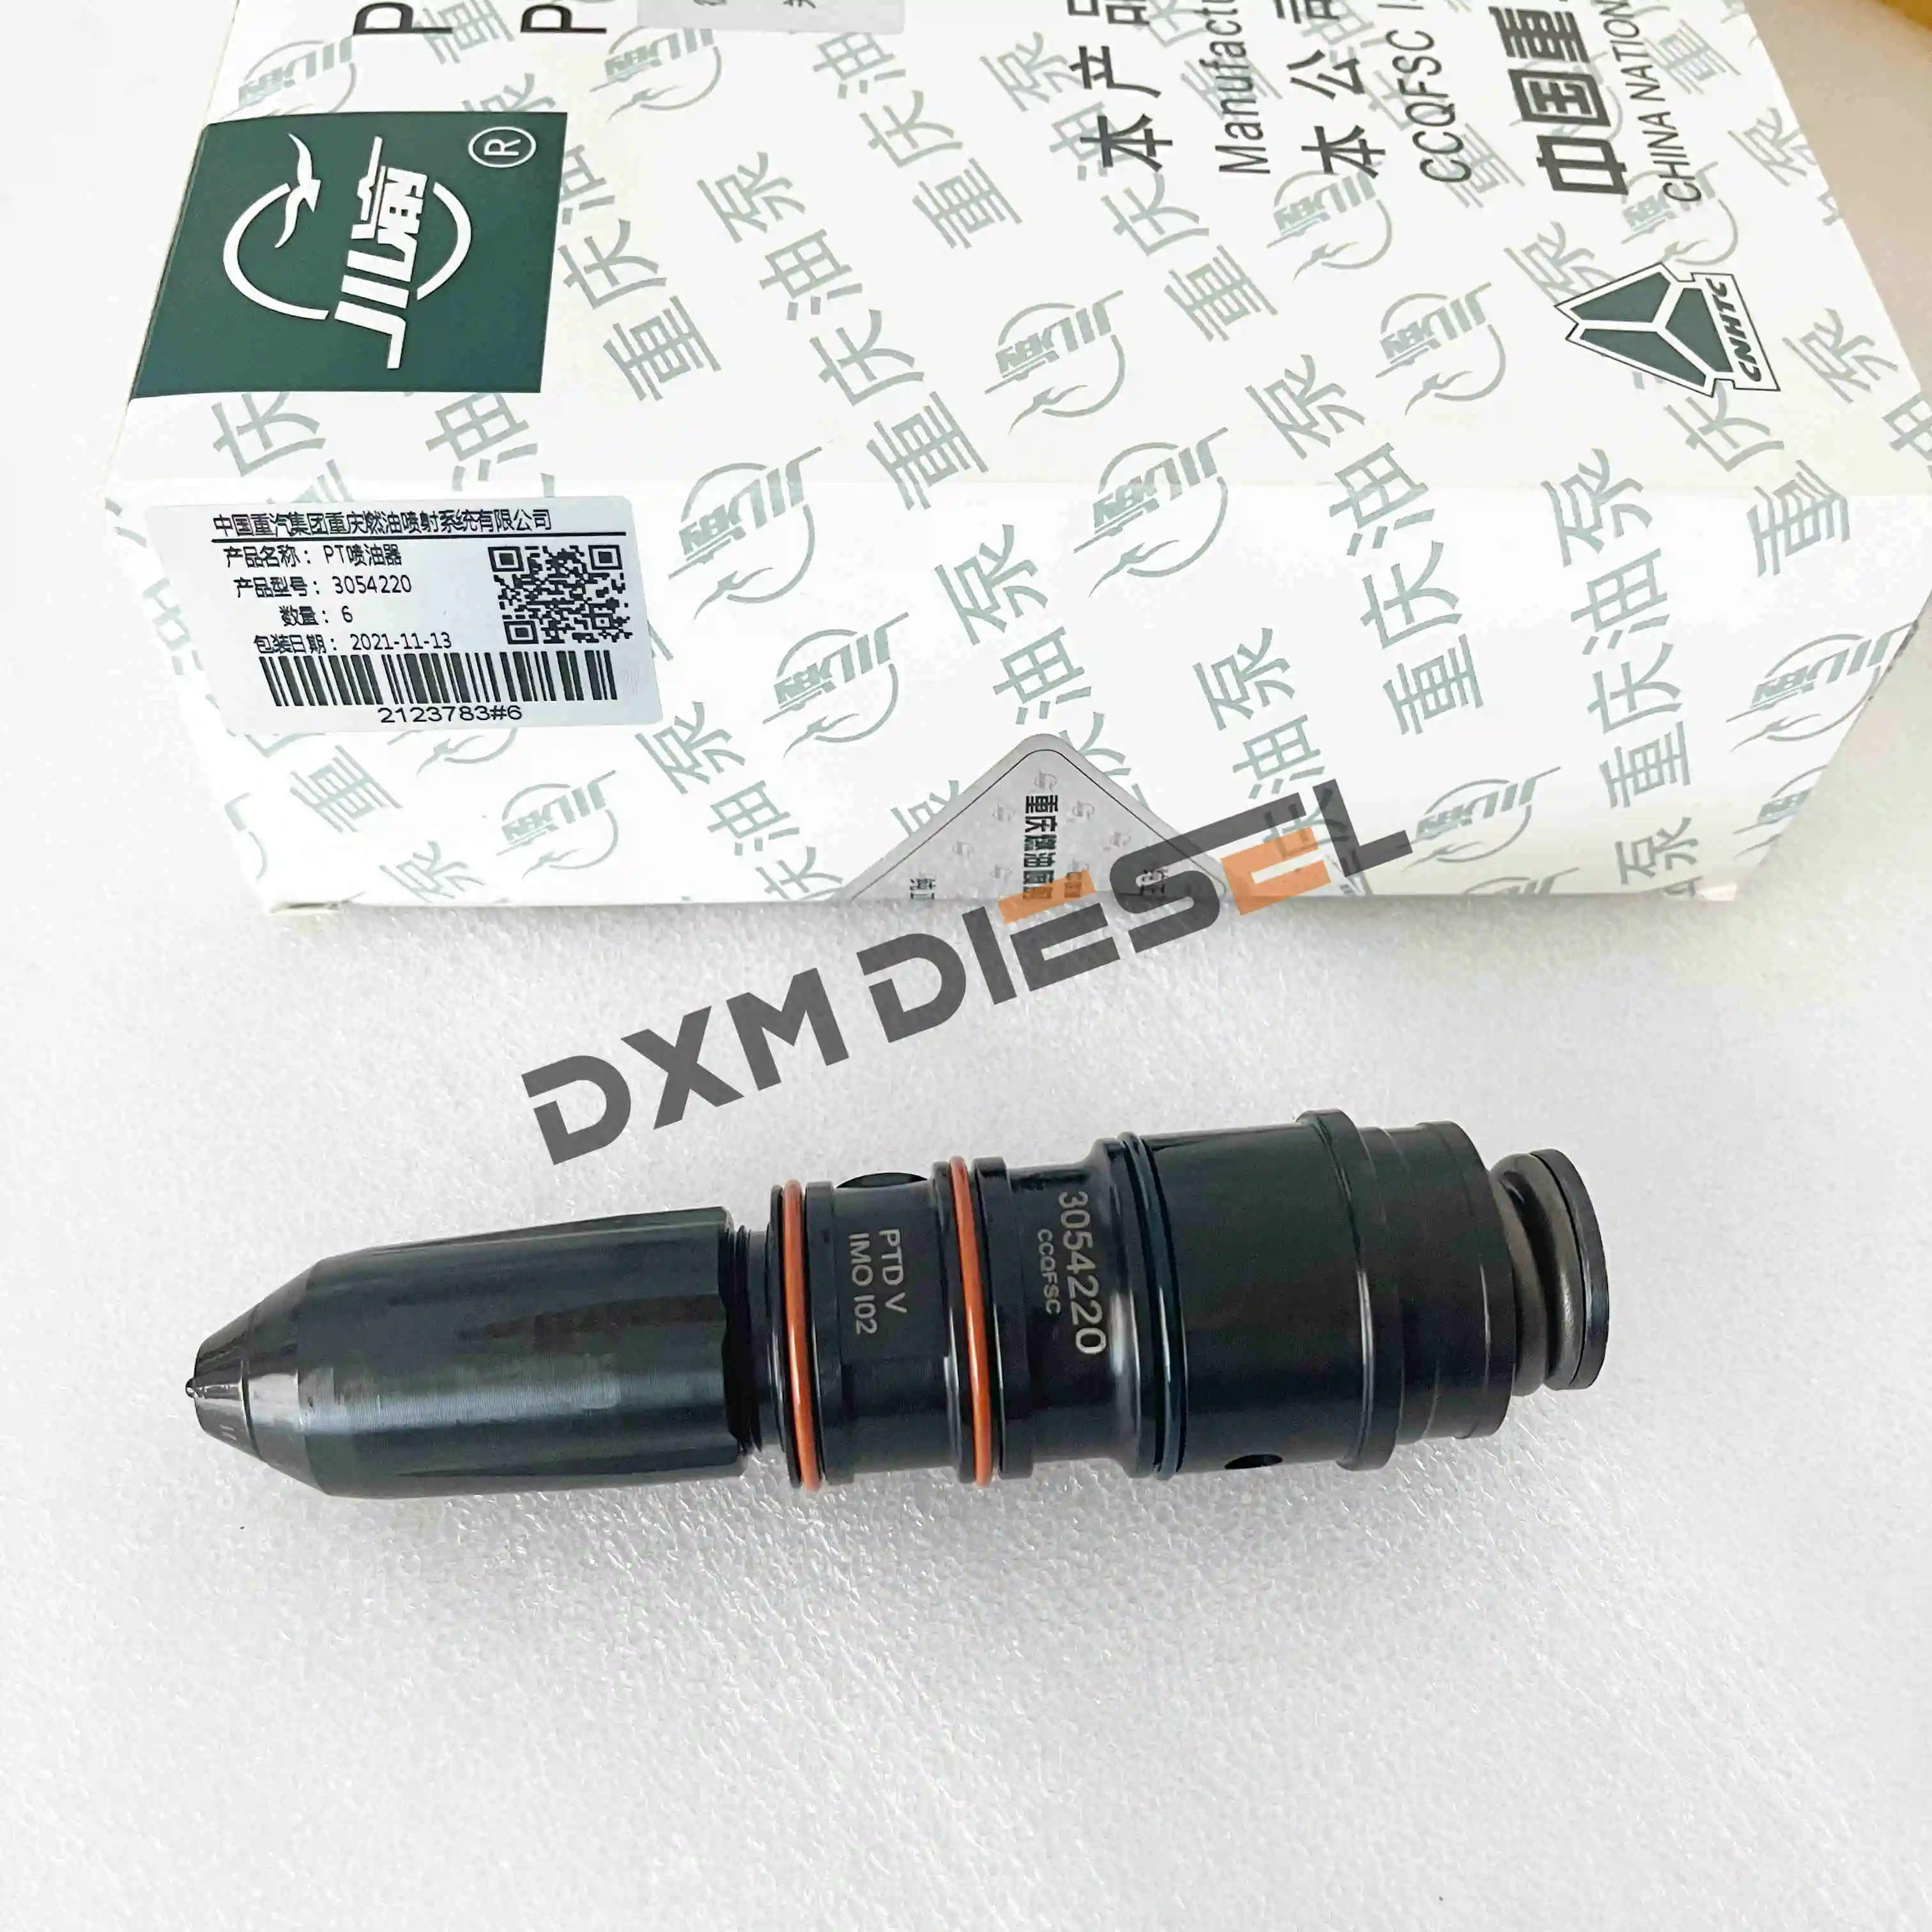 

DXM Fuel Injector 3054220 is Suitable For TA855 Accessories M350 Marine Engine PT